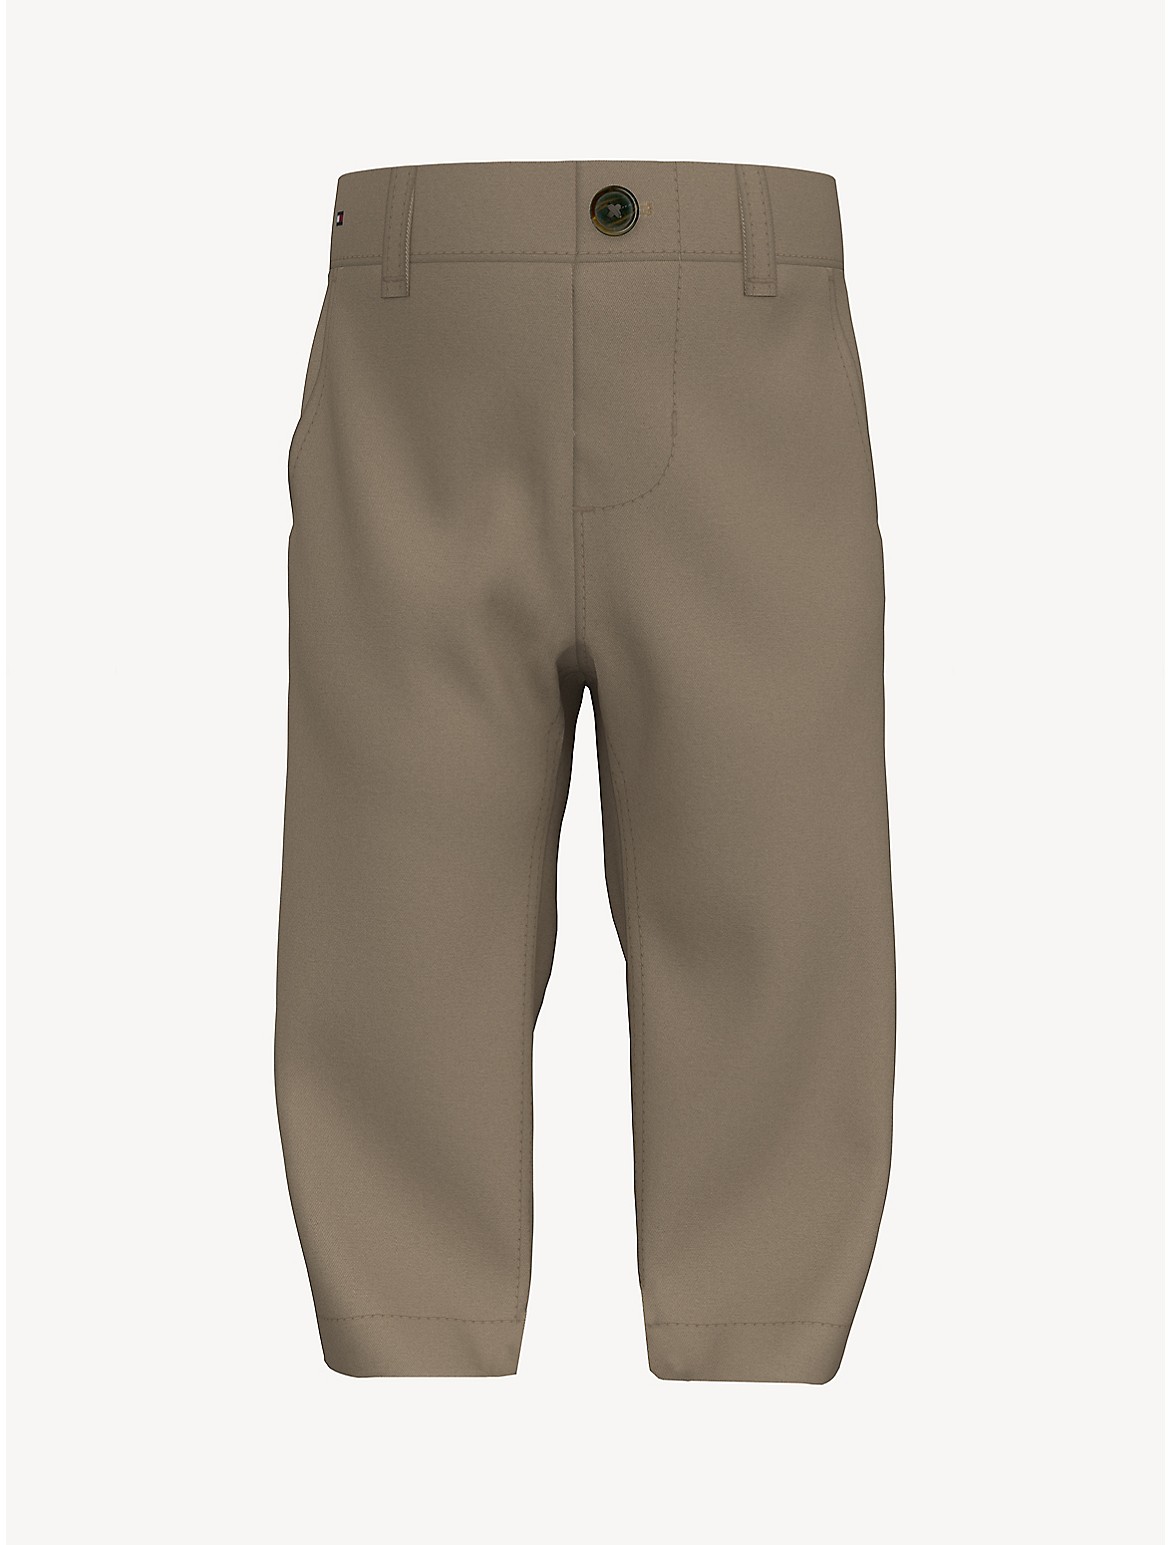 Tommy Hilfiger Boys' Babies' Solid Chino - Brown - 12M